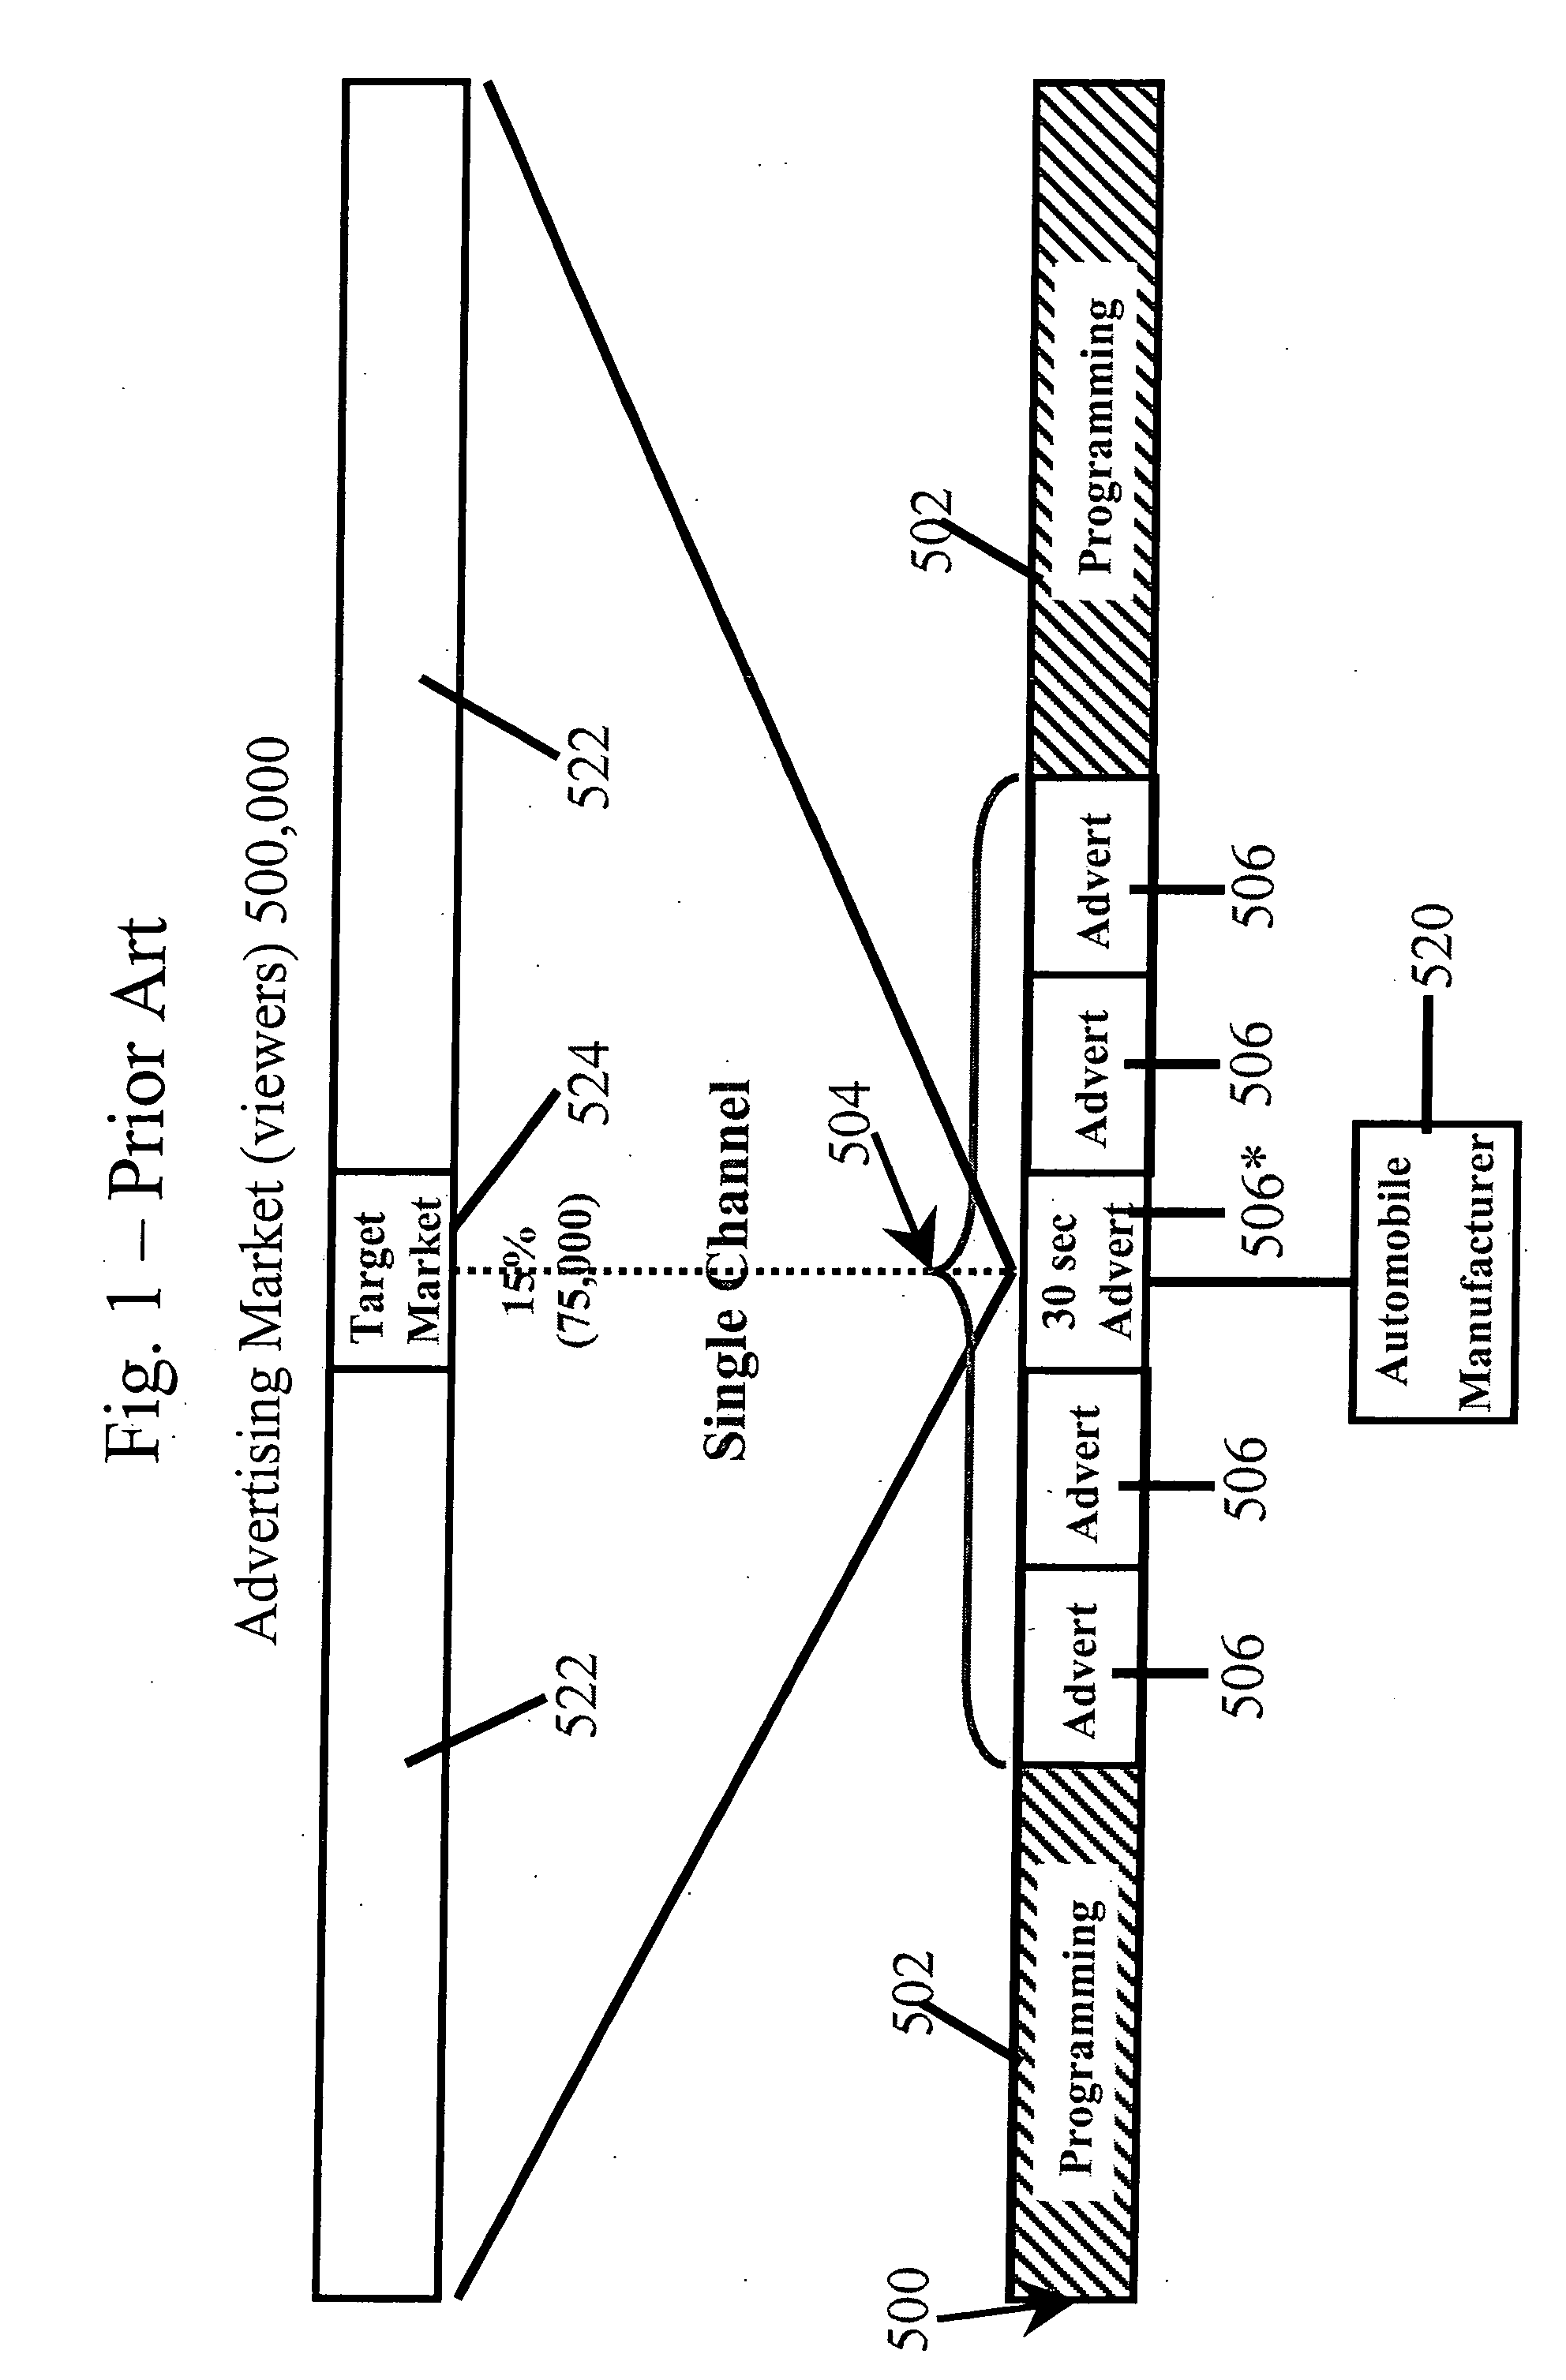 System and method for encouraging advertisement viewing